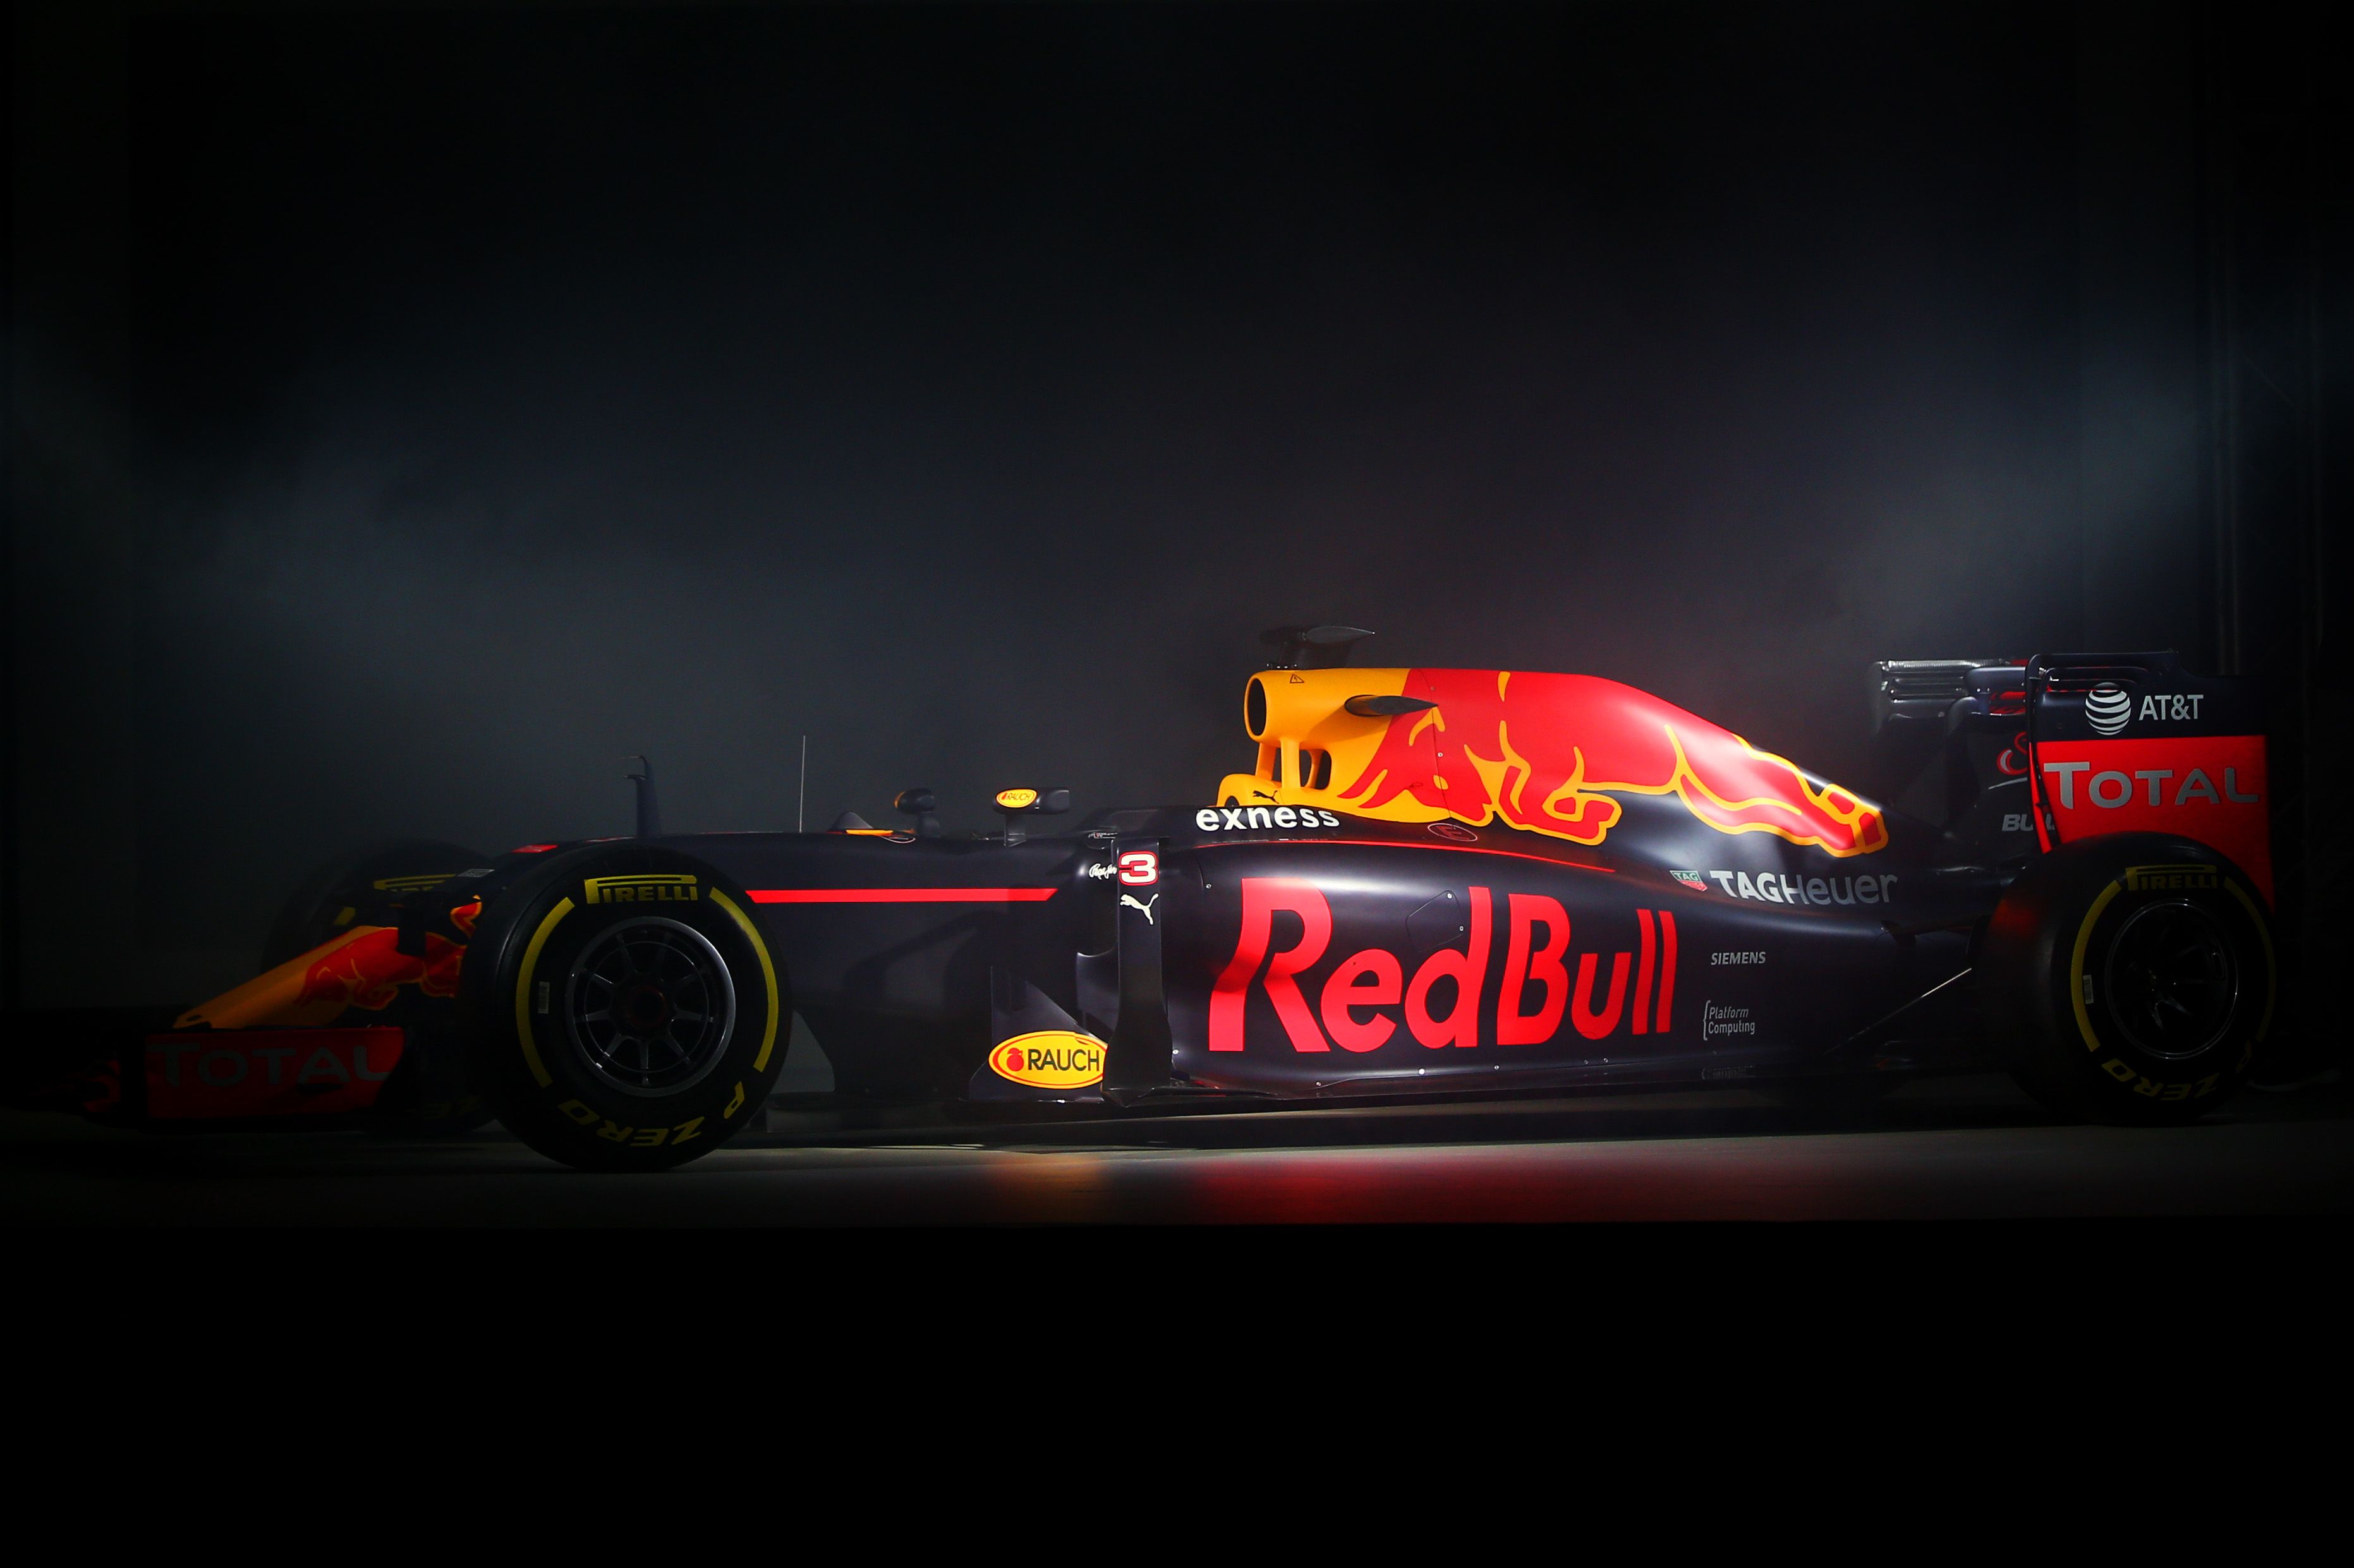 Red Bull Racing Rb3 Wallpapers